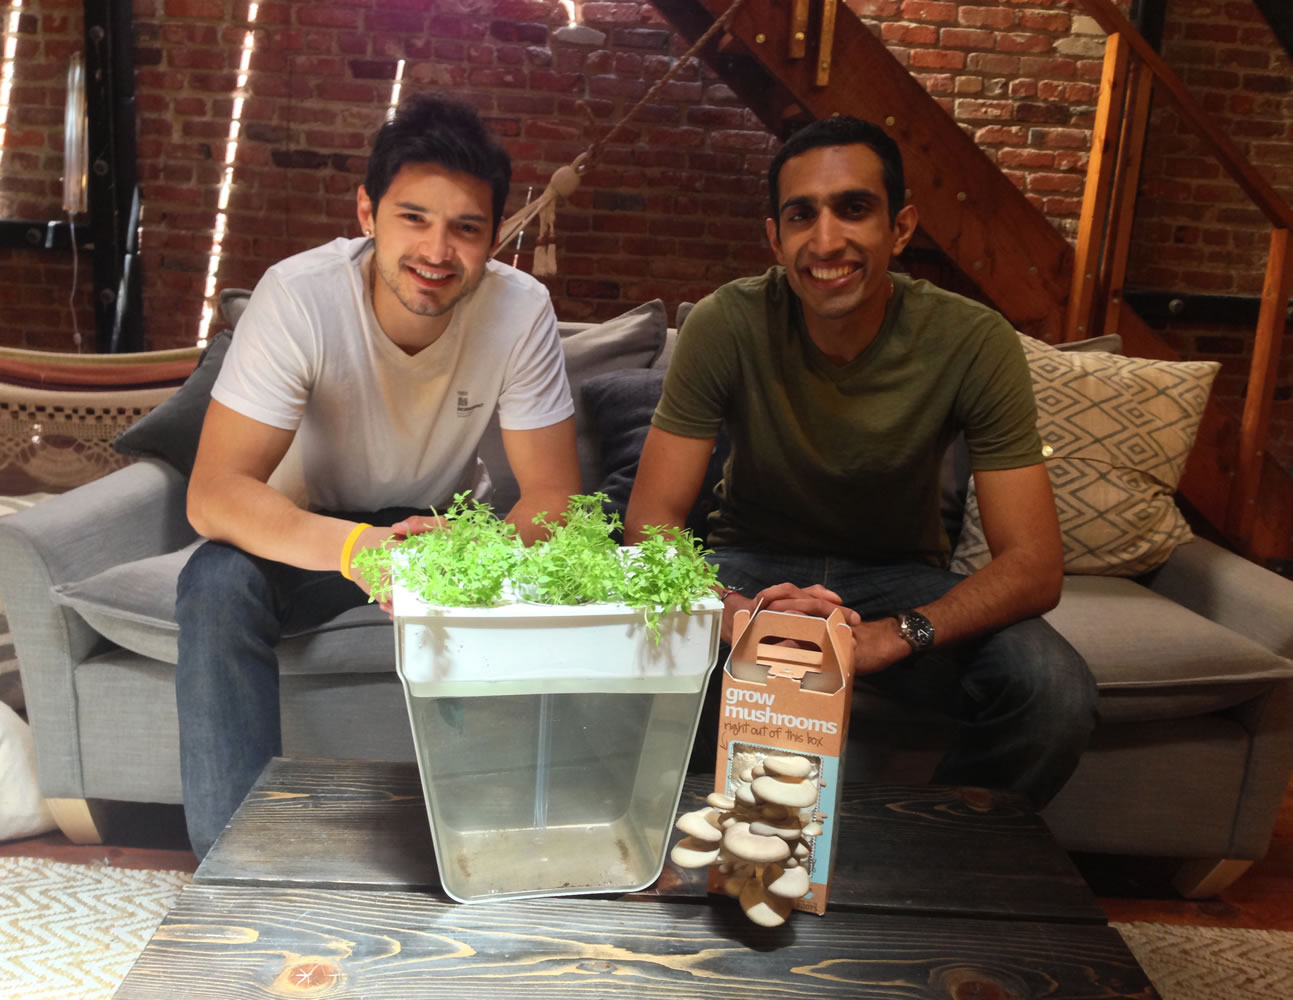 Back to the Roots founders Alejandro Velez, left, and Nikhil Arora started growing mushrooms on a whim in college.